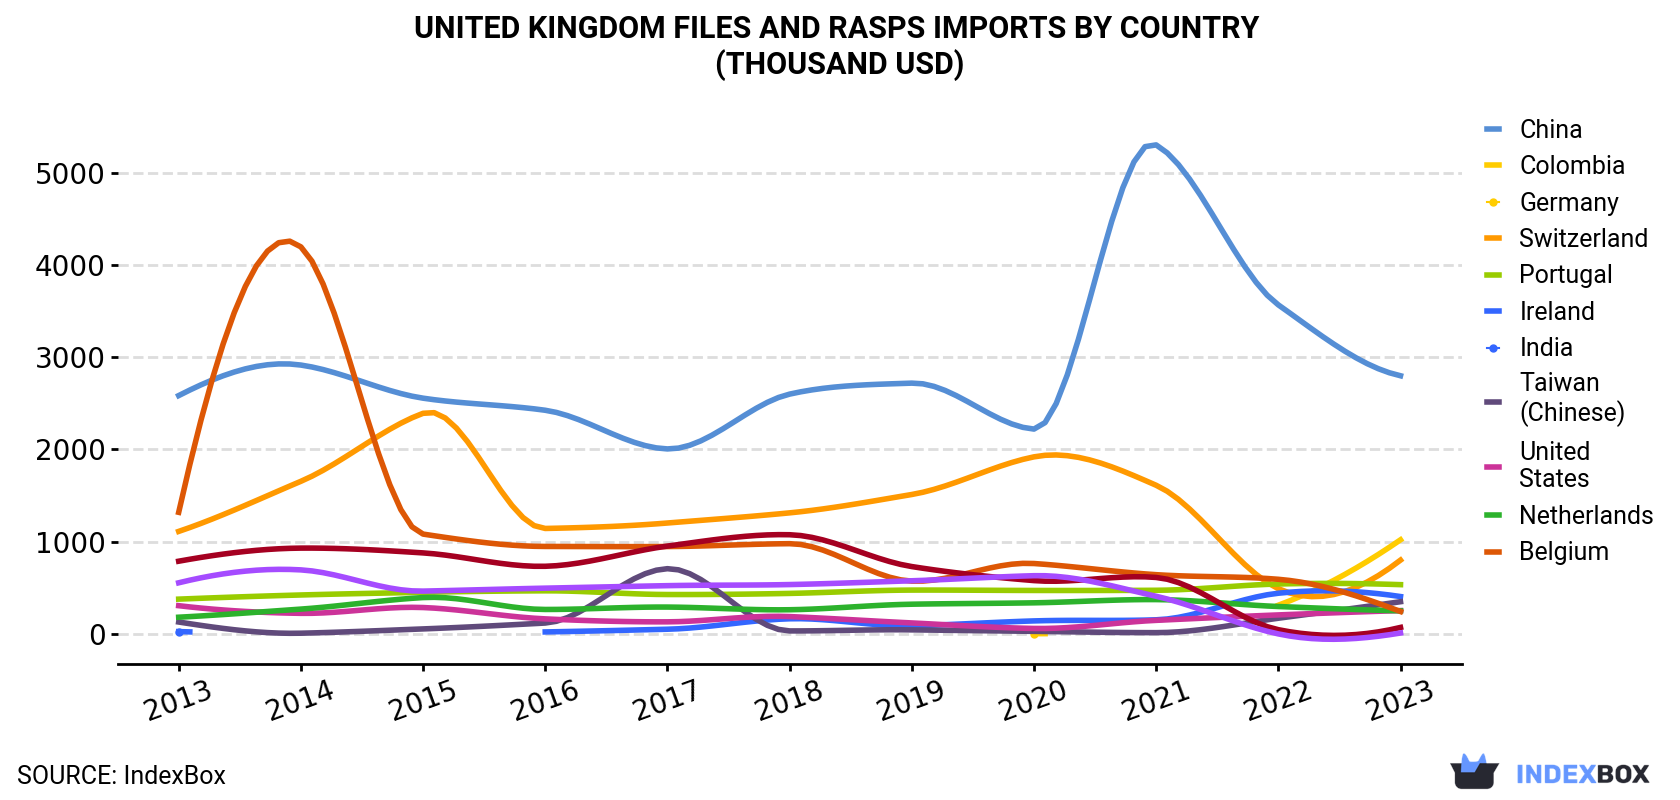 United Kingdom Files And Rasps Imports By Country (Thousand USD)